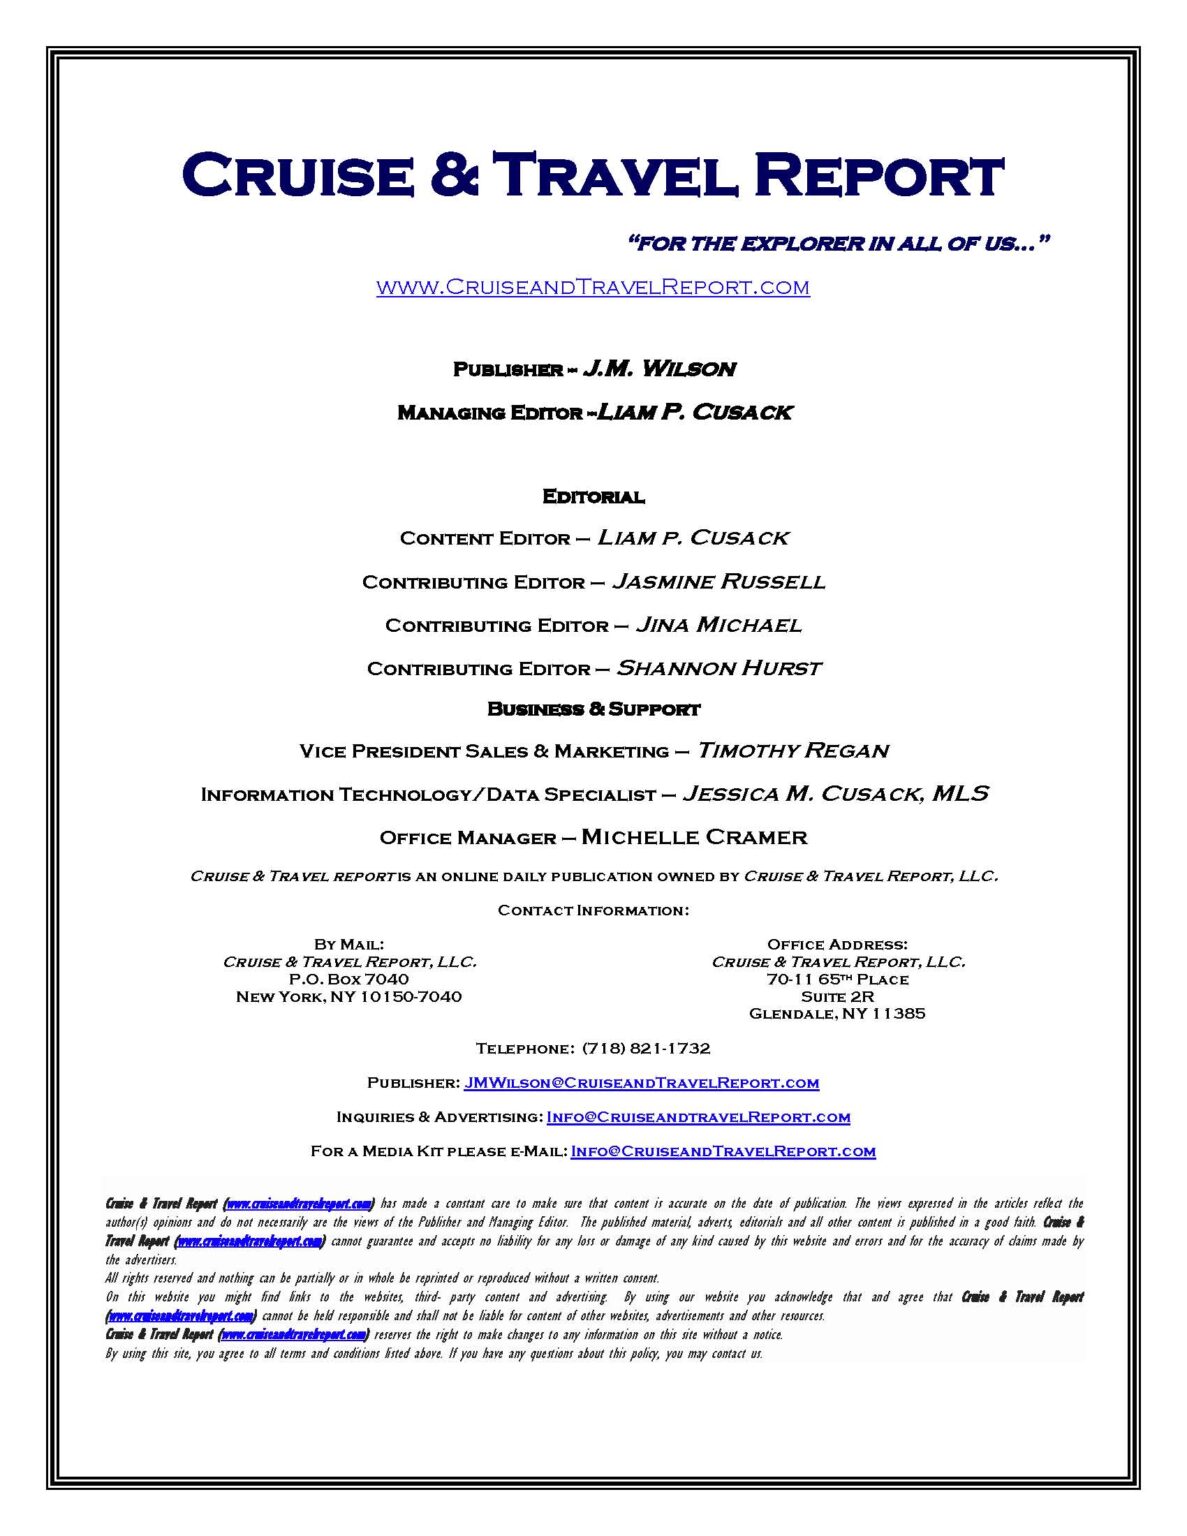 voyage report of ship